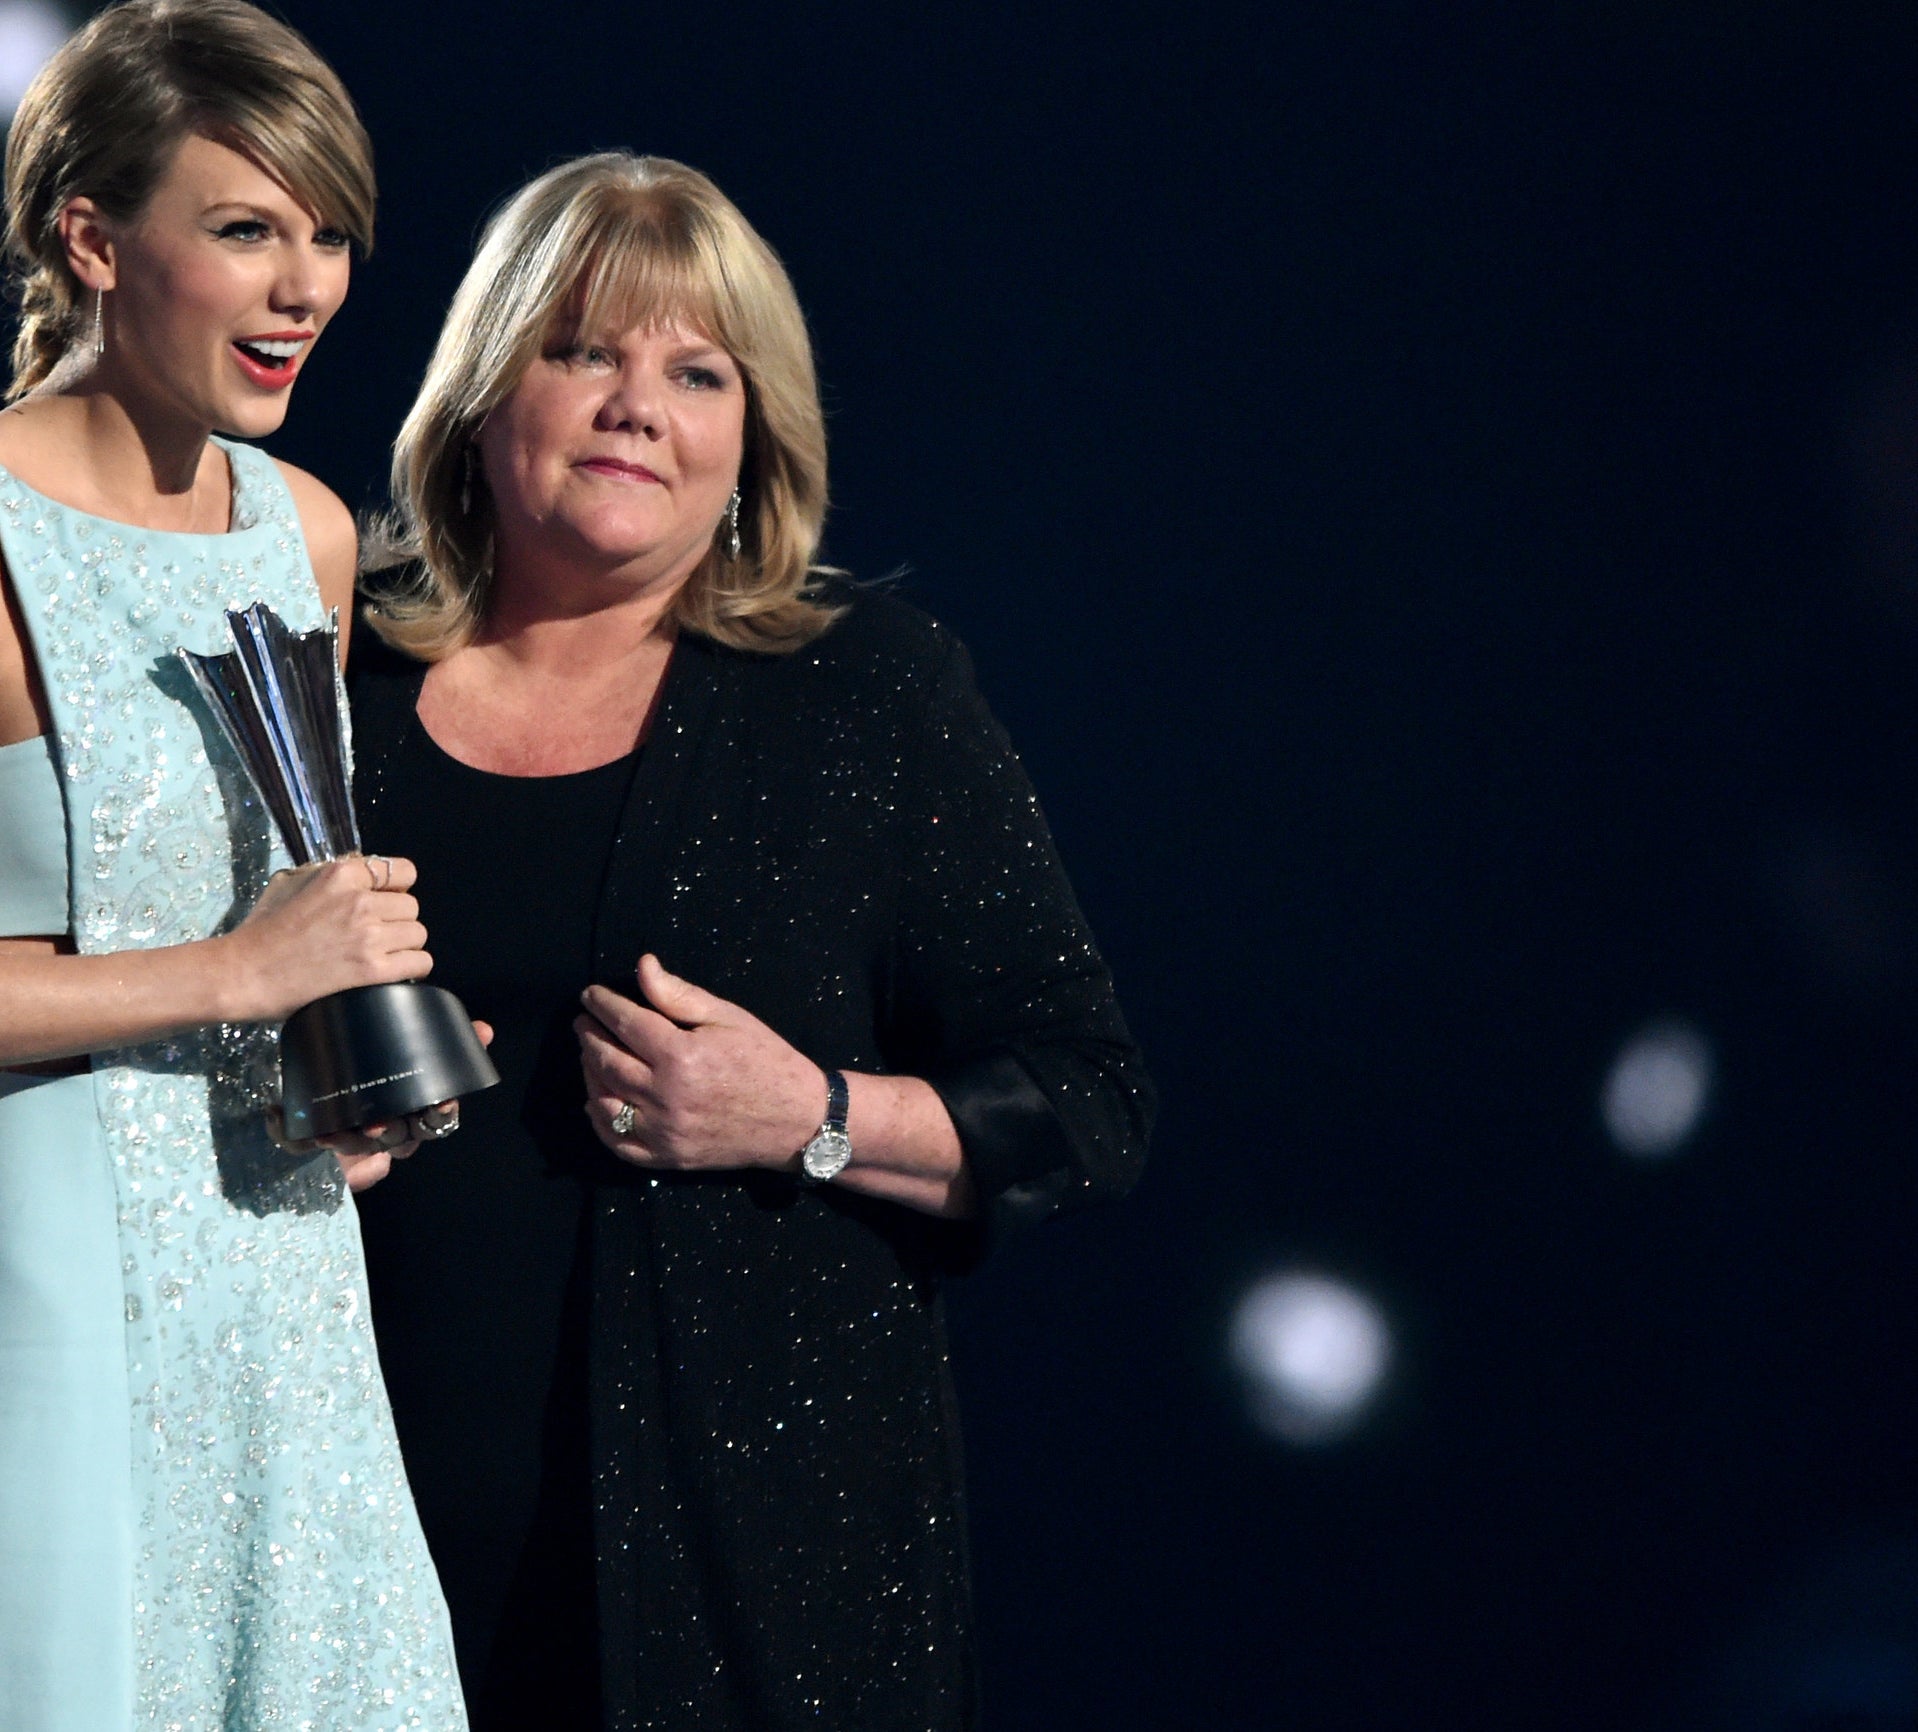 Closeup of Taylor and Andrea Swift